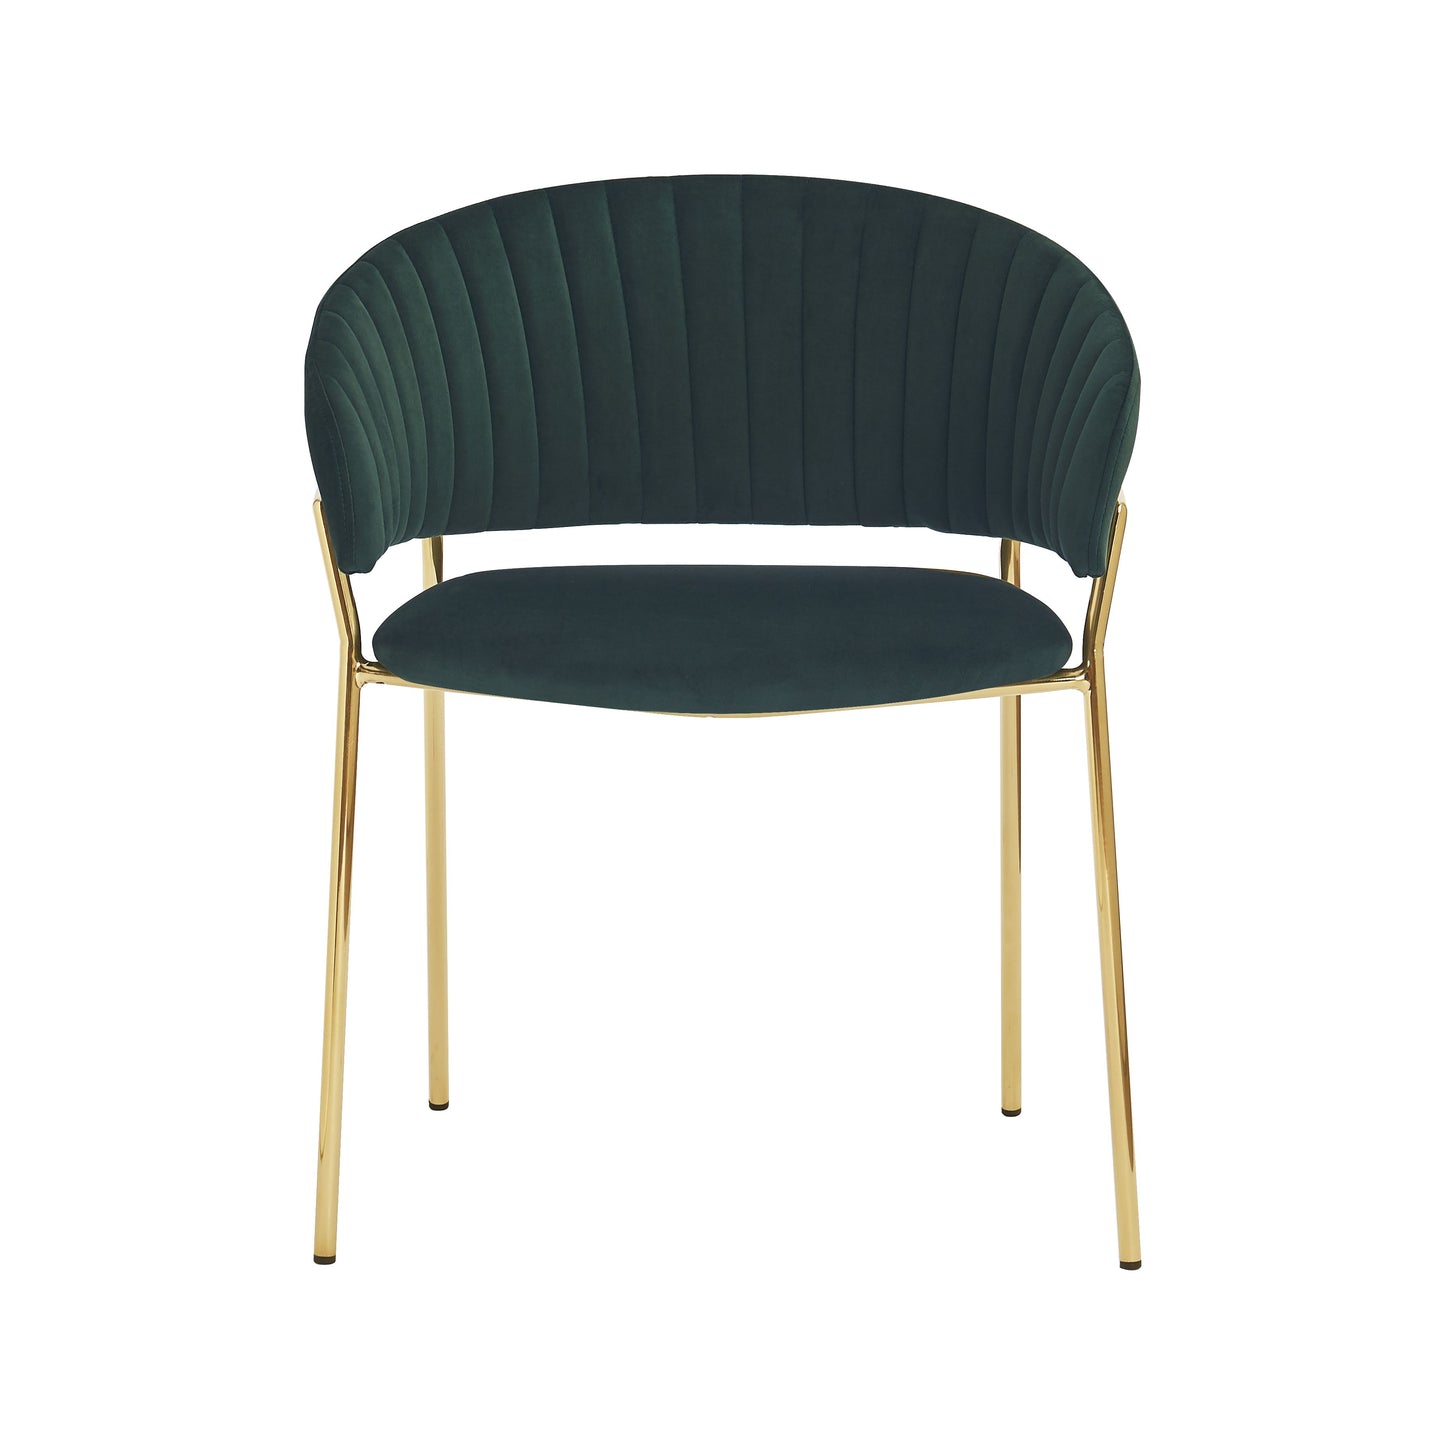 Lex Green Velvet Chairs with Gold Legs